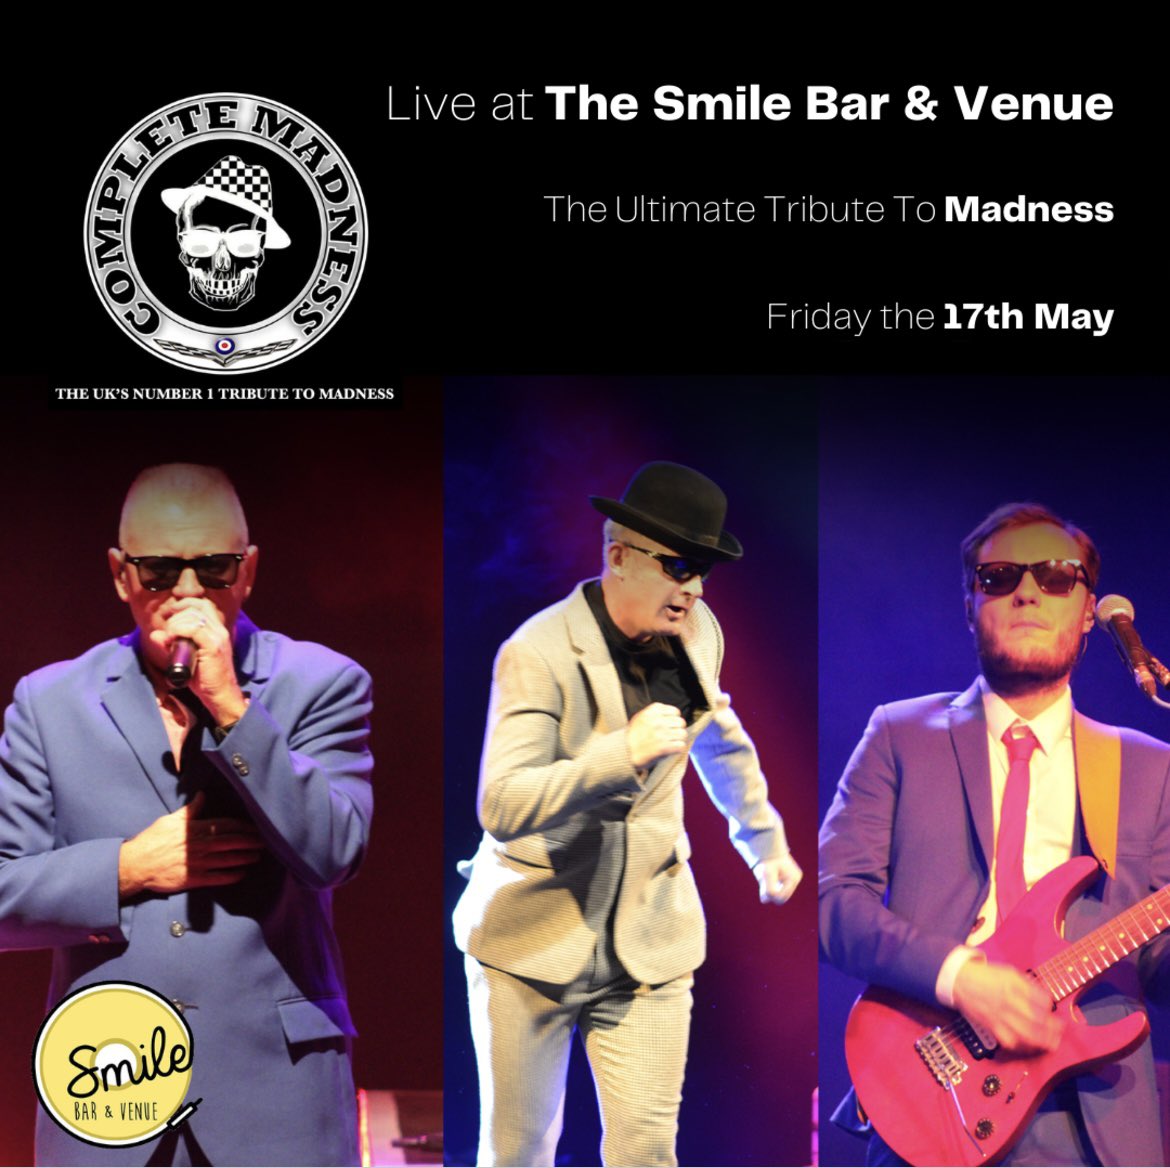 We're coming to Huddersfield 😎 Friday 17th May 2024 The Smile Bar and Venue Wakefield Rd, Aspley #Huddersfield HD1 3AQ Tickets selling fast👇 fatsoma.com/e/2g4ytnf1/la/… #CompleteMadness #Ska #Madness #2tone #theSpecials #thebeat #BadManners #LiveMusic #HappyFriday #FollowUs